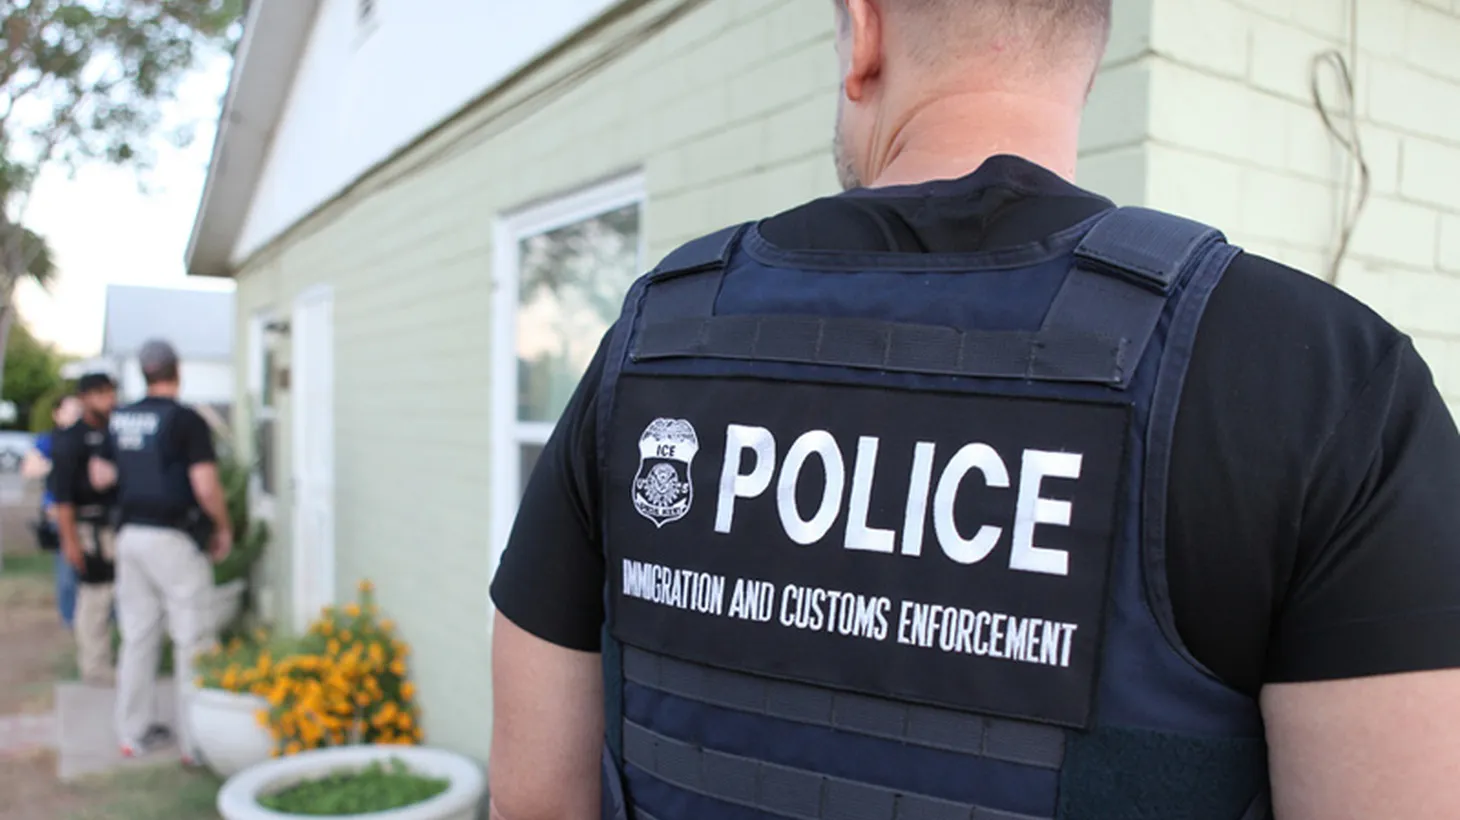 Immigration and Customs Enforcement (ICE) has spent billions of dollars to build a massive surveillance network since 2008.